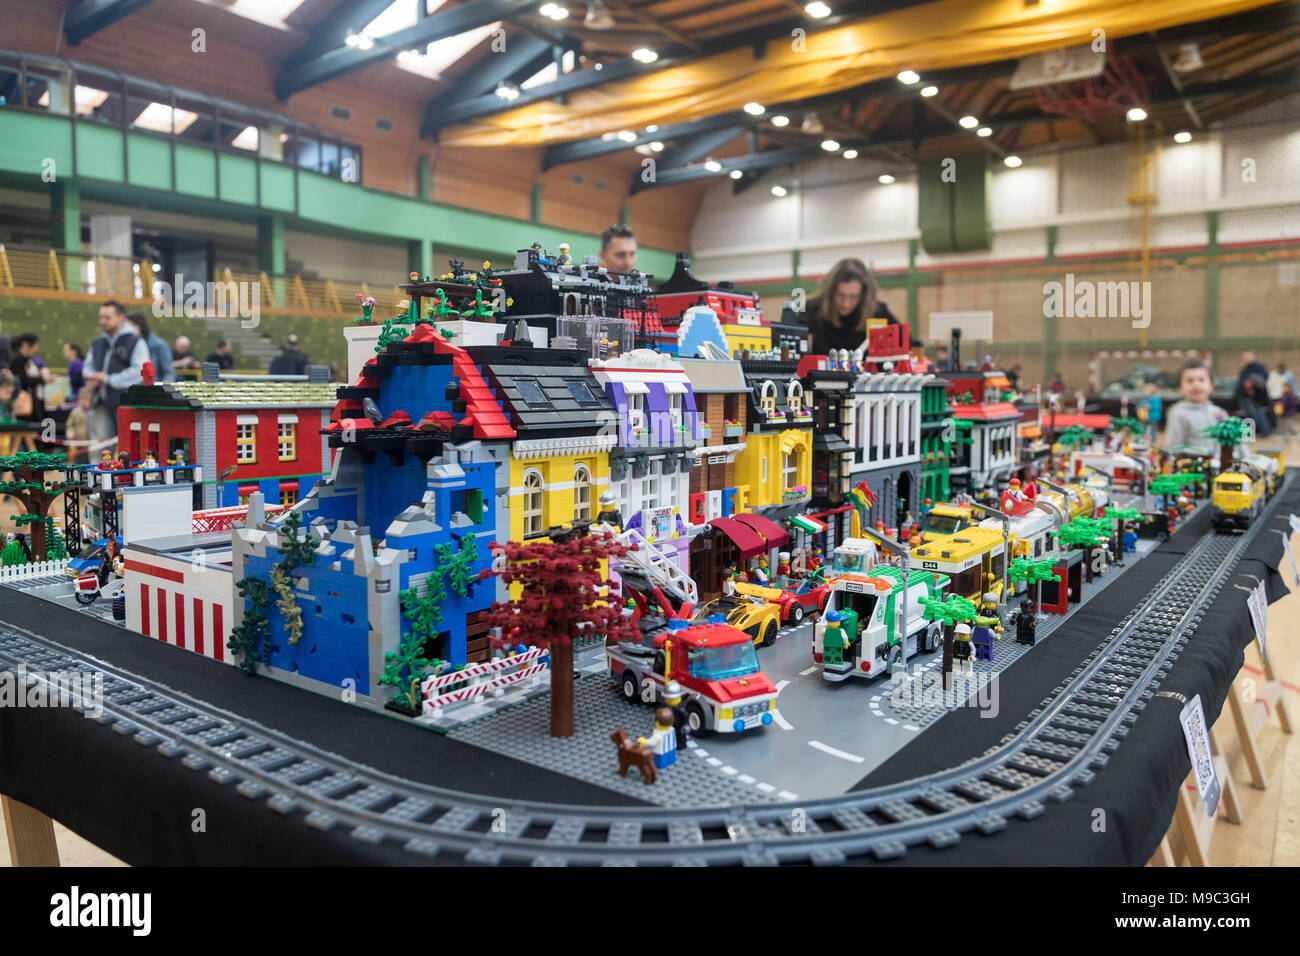 Lego Models High Resolution Stock Photography and Images - Alamy